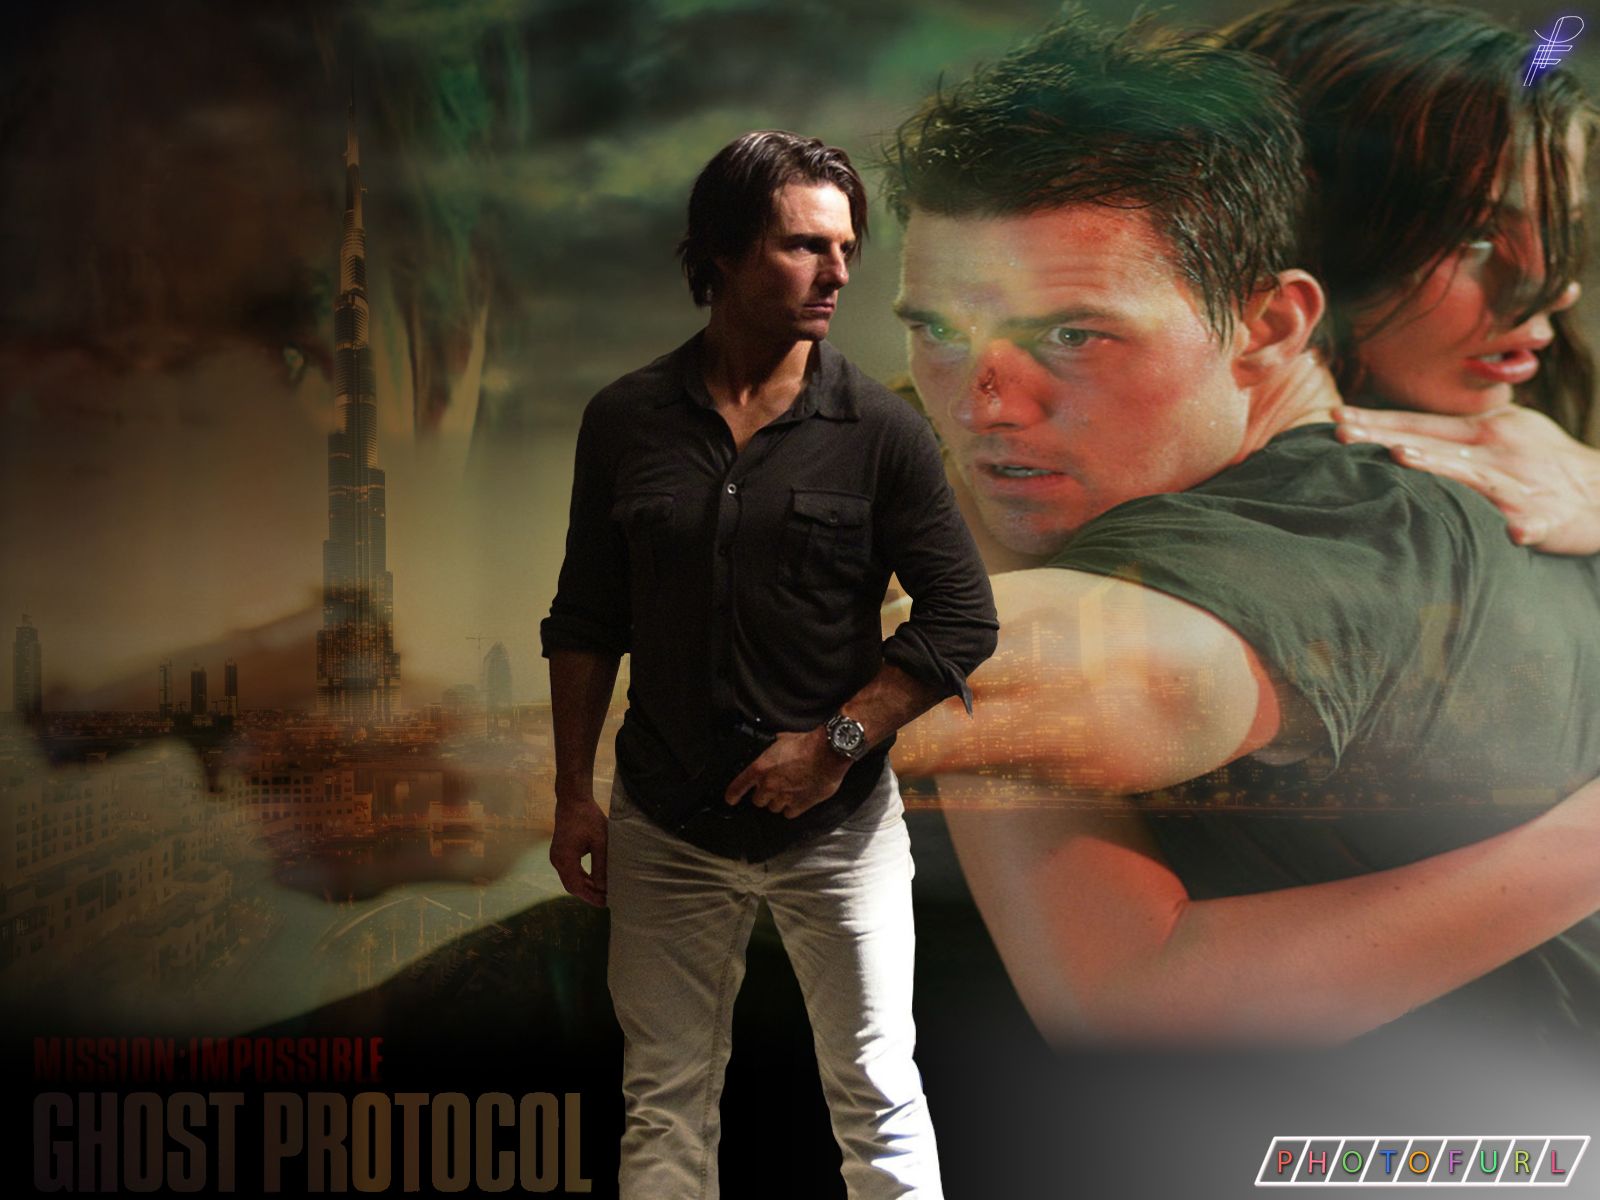 Mission Impossible 4 Wallpaper HD. Ghost Protocol Wallpaper